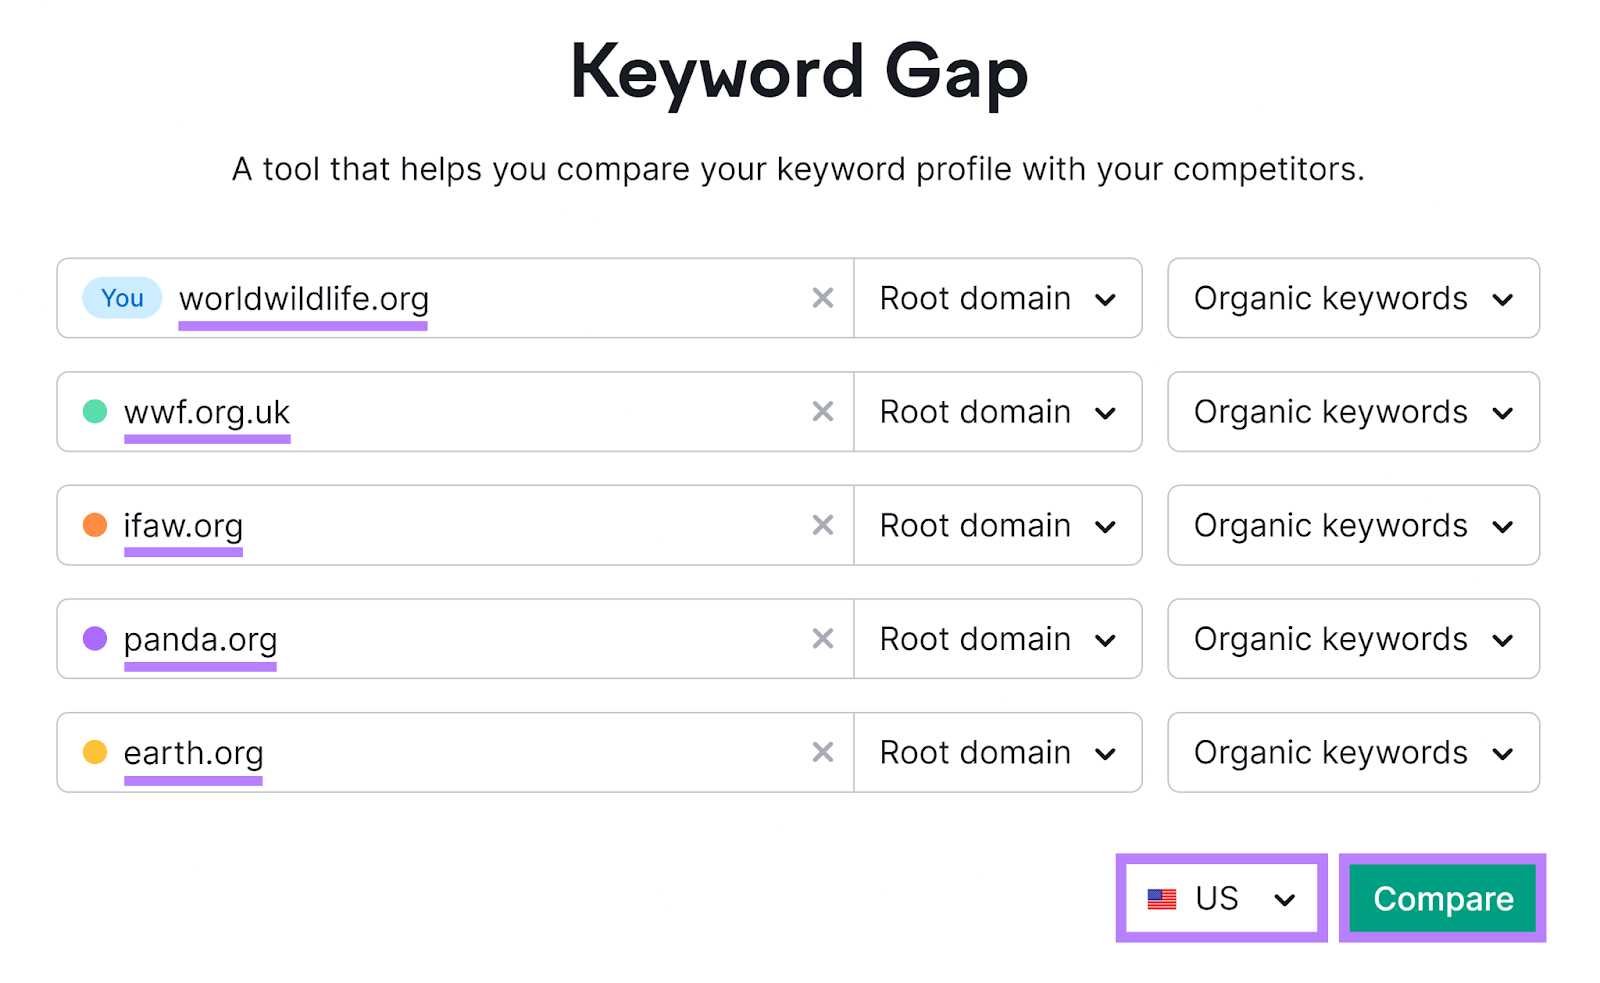 Semrush Keyword Gap tool start with domains entered, location set to US, and compare button highlighted